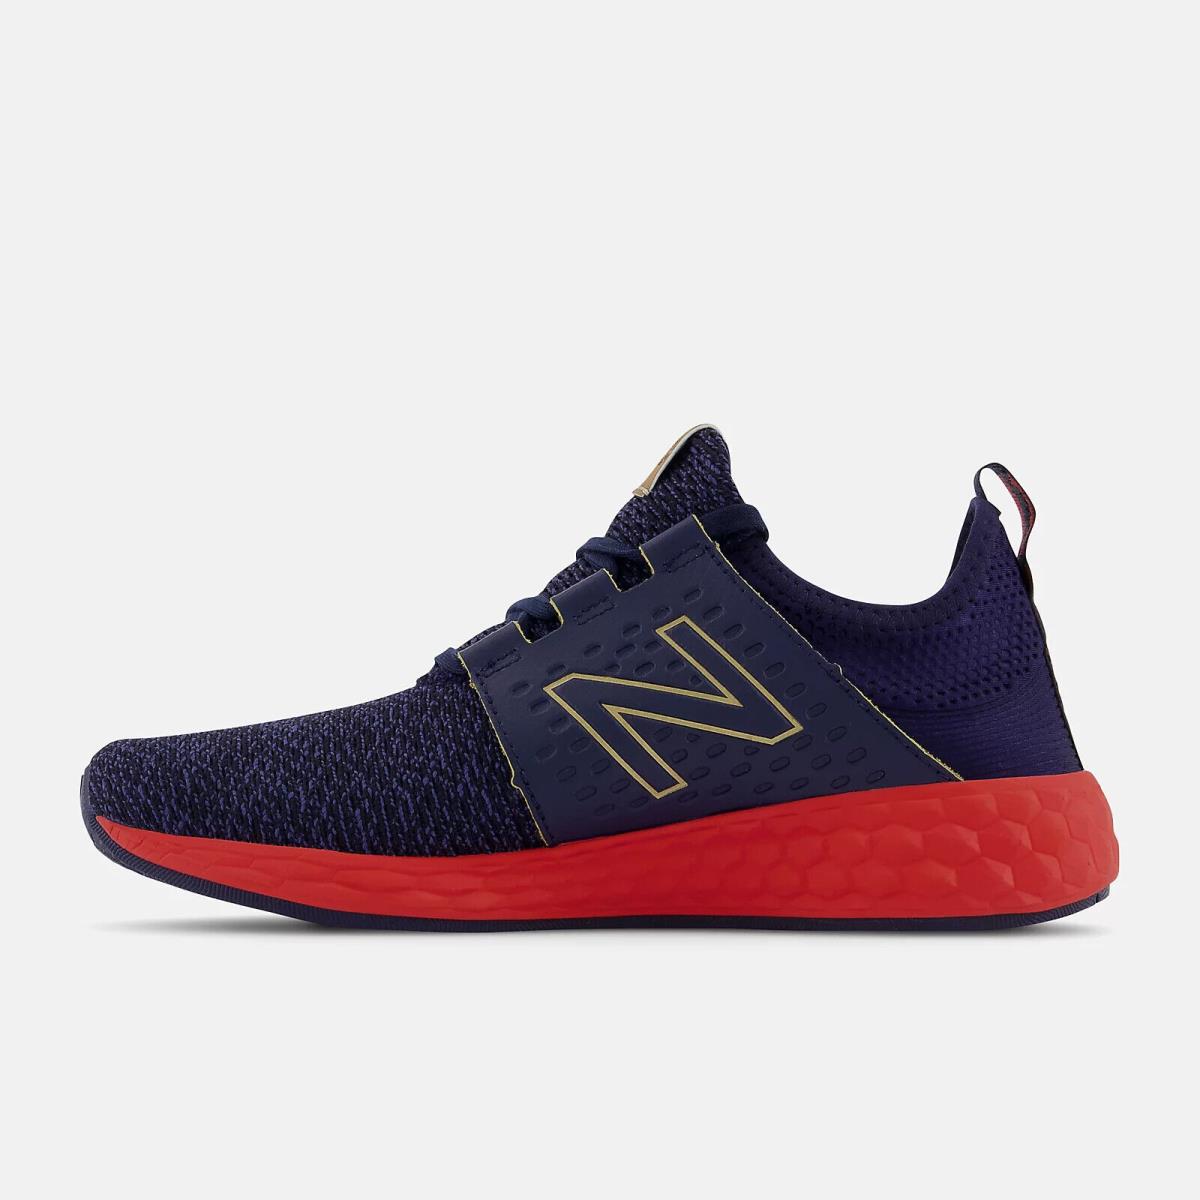 New Balance shoes  - Team Navy Neo Flame 0